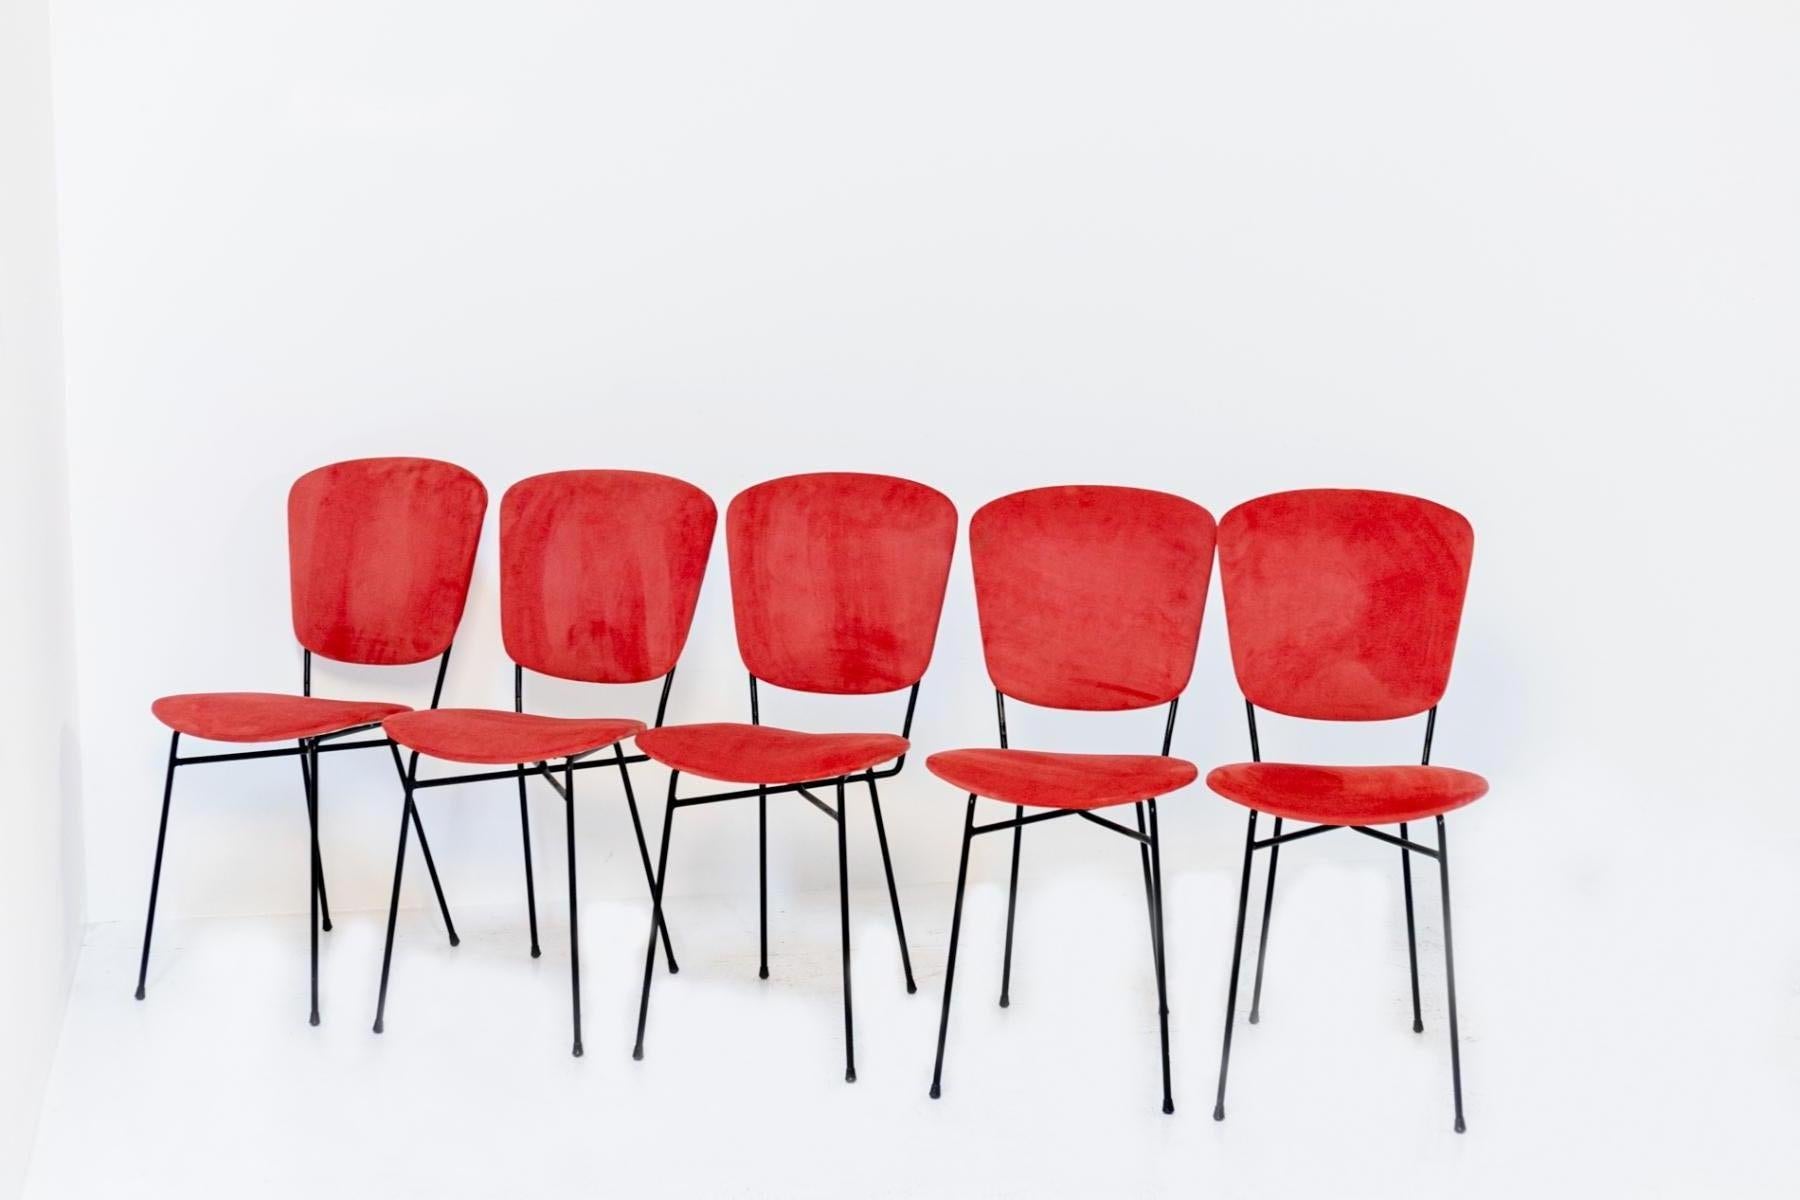 Beautiful set of five chairs of Italian manufacture Doro Cuneo of the 60s.
The chairs have been recently restored and upholstered in fine cotton, so in excellent condition. The chairs have the original label.
They were made with black lacquered